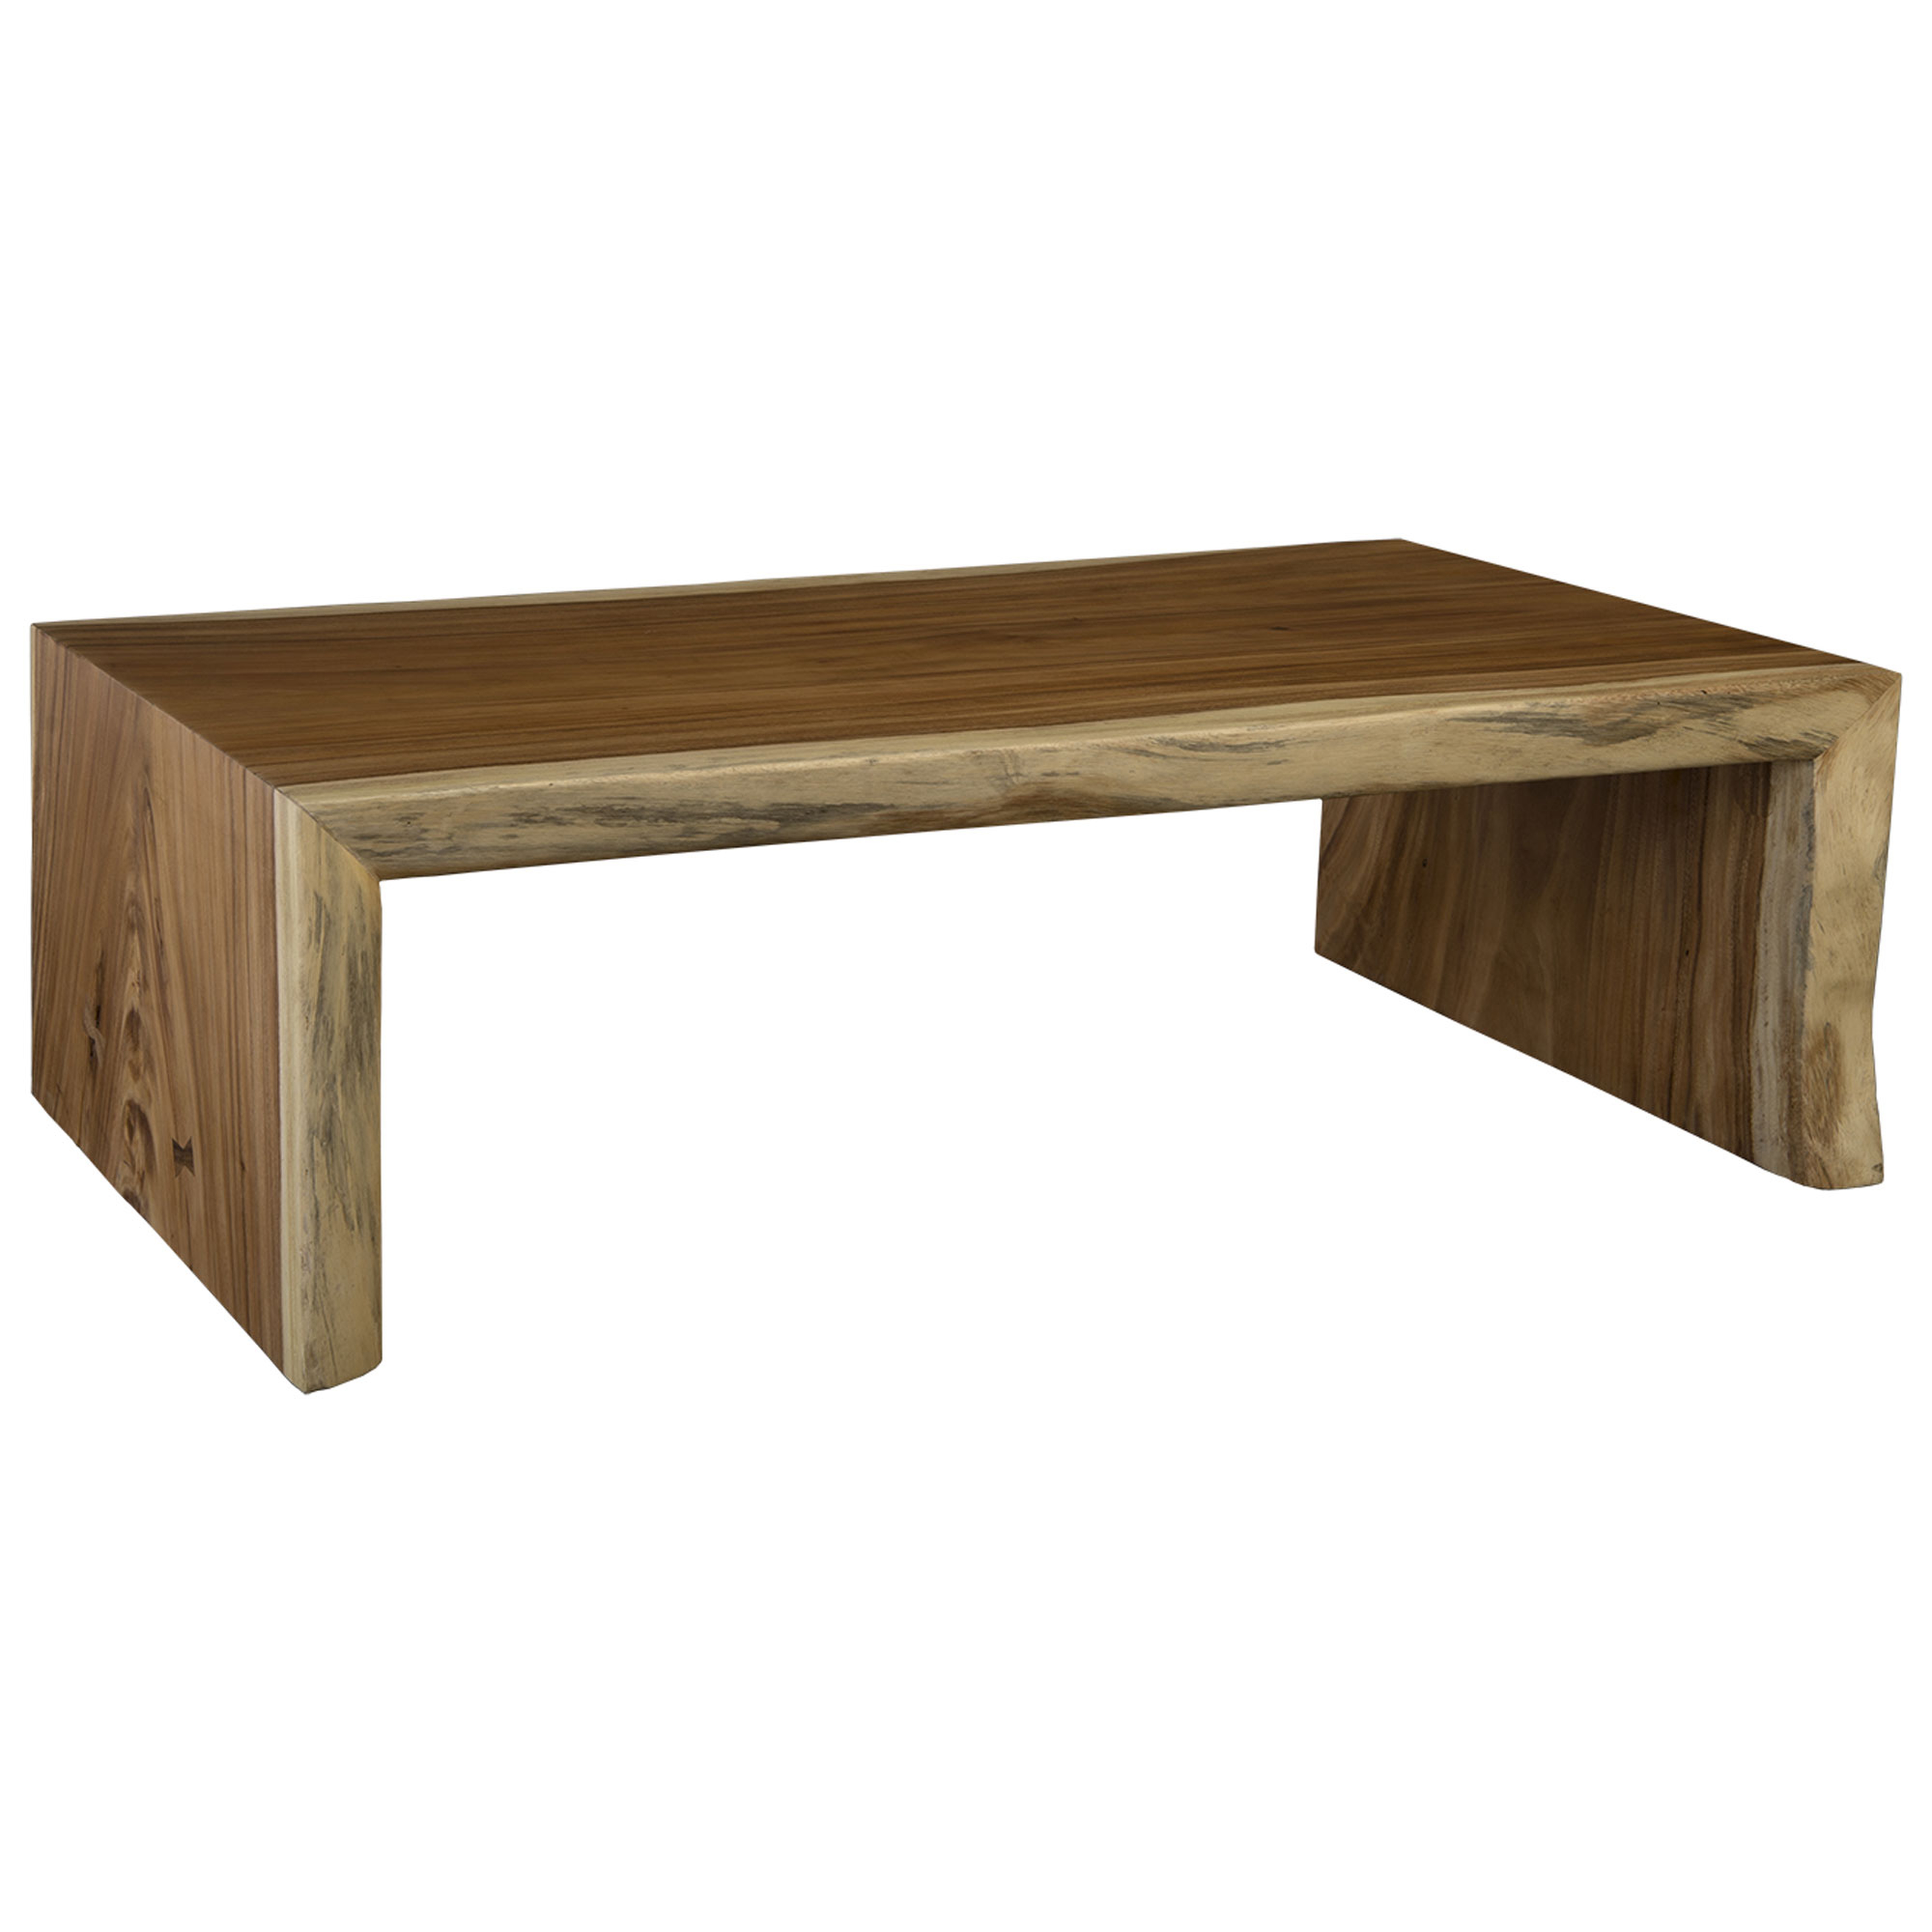 Phillips Collection Waterfall Rustic Lodge Natural Chamcha Wood Coffee Table - Kathy Kuo Home